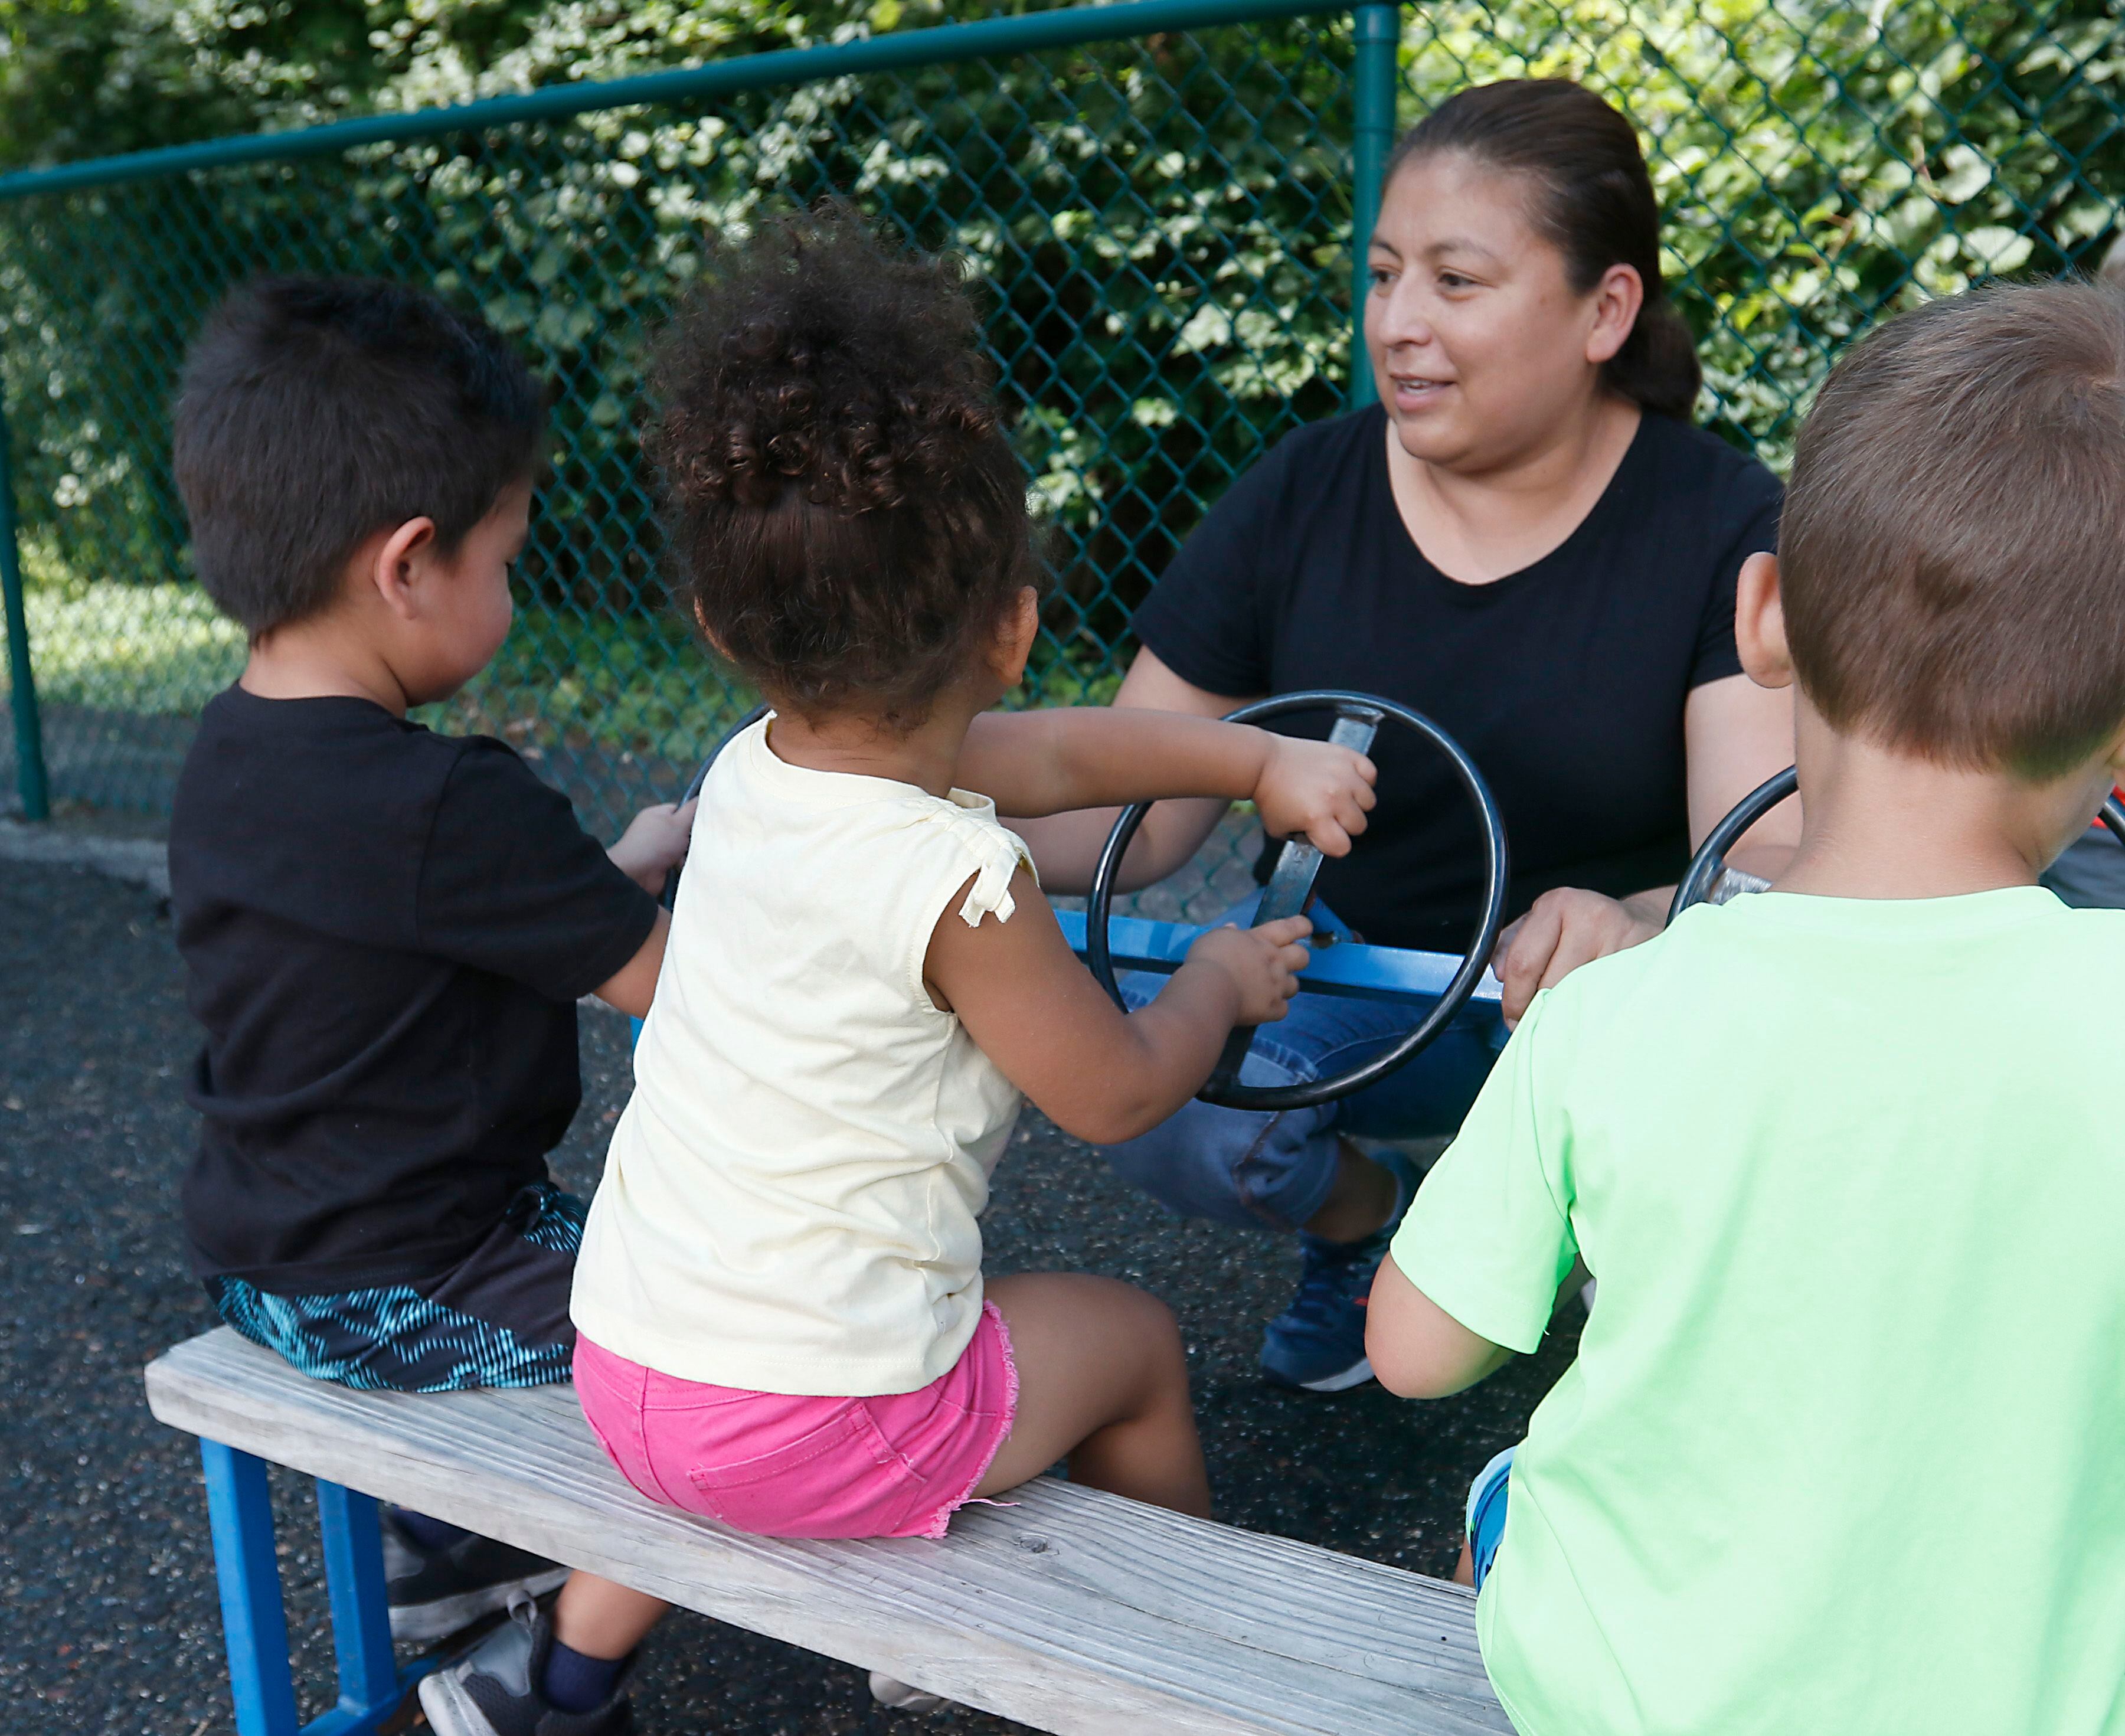 Teacher Nunez Arias interacts with a with children as they play on the playground Thursday, July 28, 2022, at the Friendship House, 100 South Main Street, in Crystal Lake. Childcare centers are struggling to find enough teachers to maintain operations.